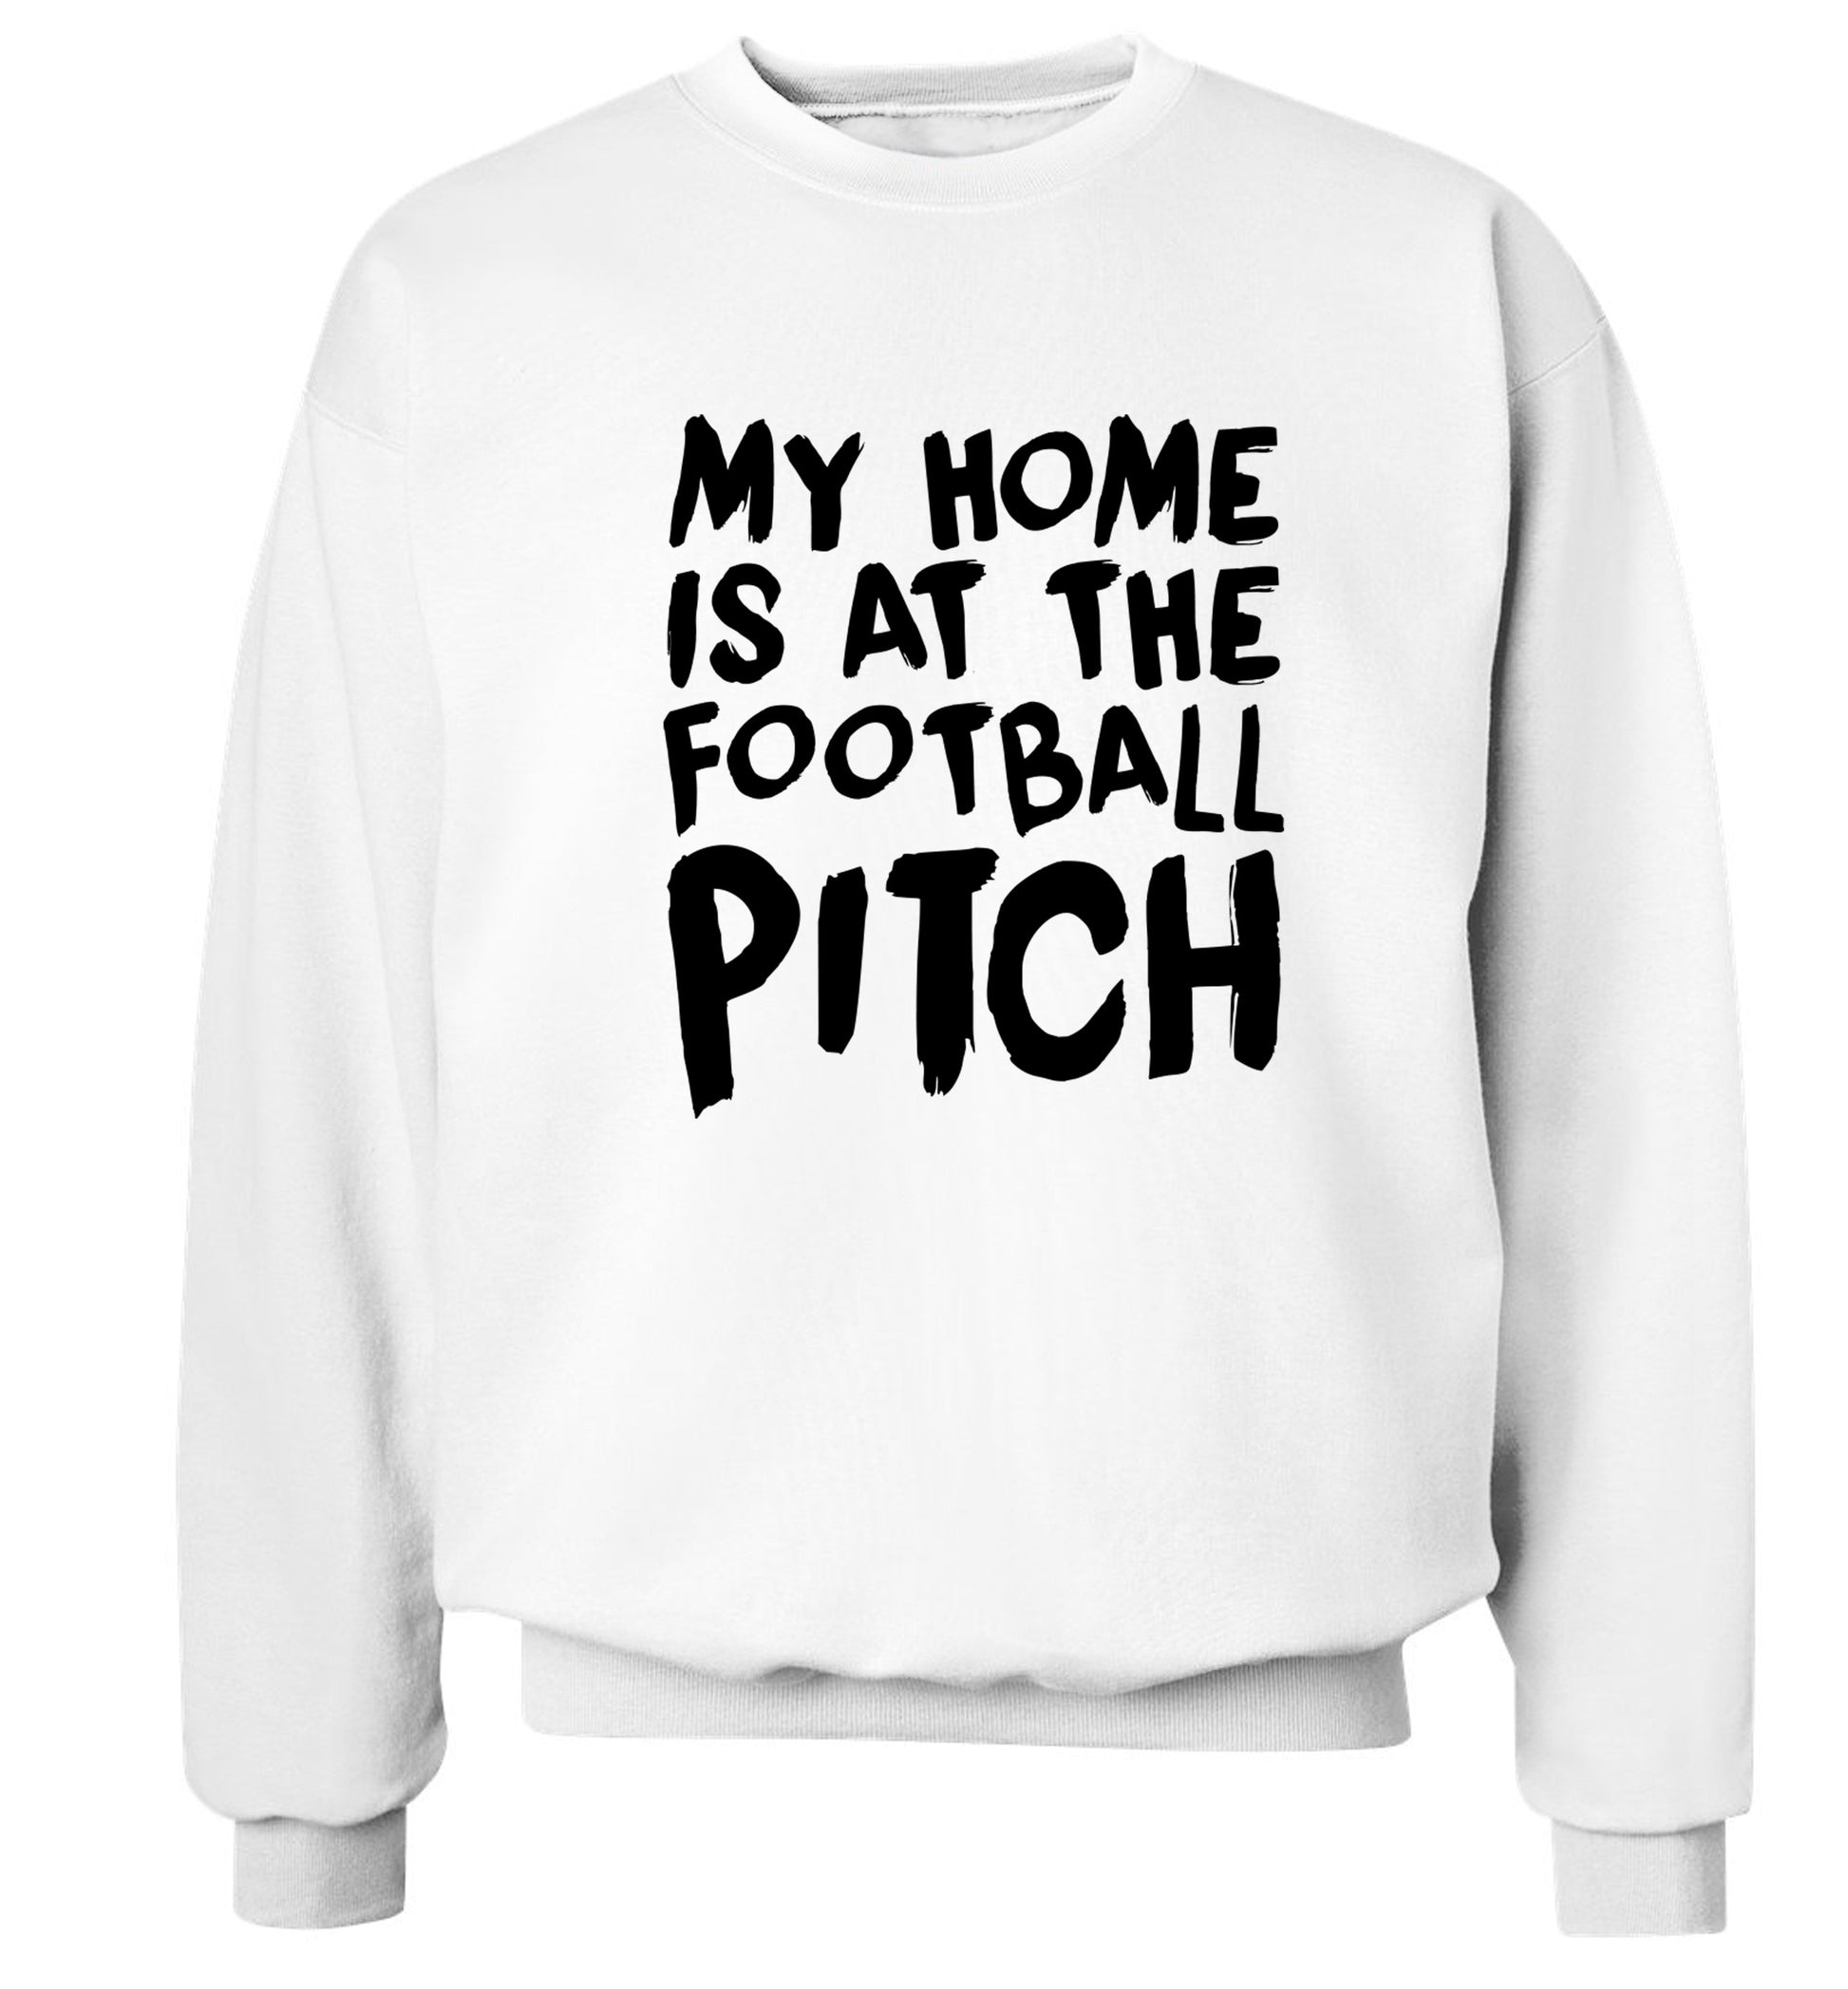 My home is at the football pitch Adult's unisex white Sweater 2XL